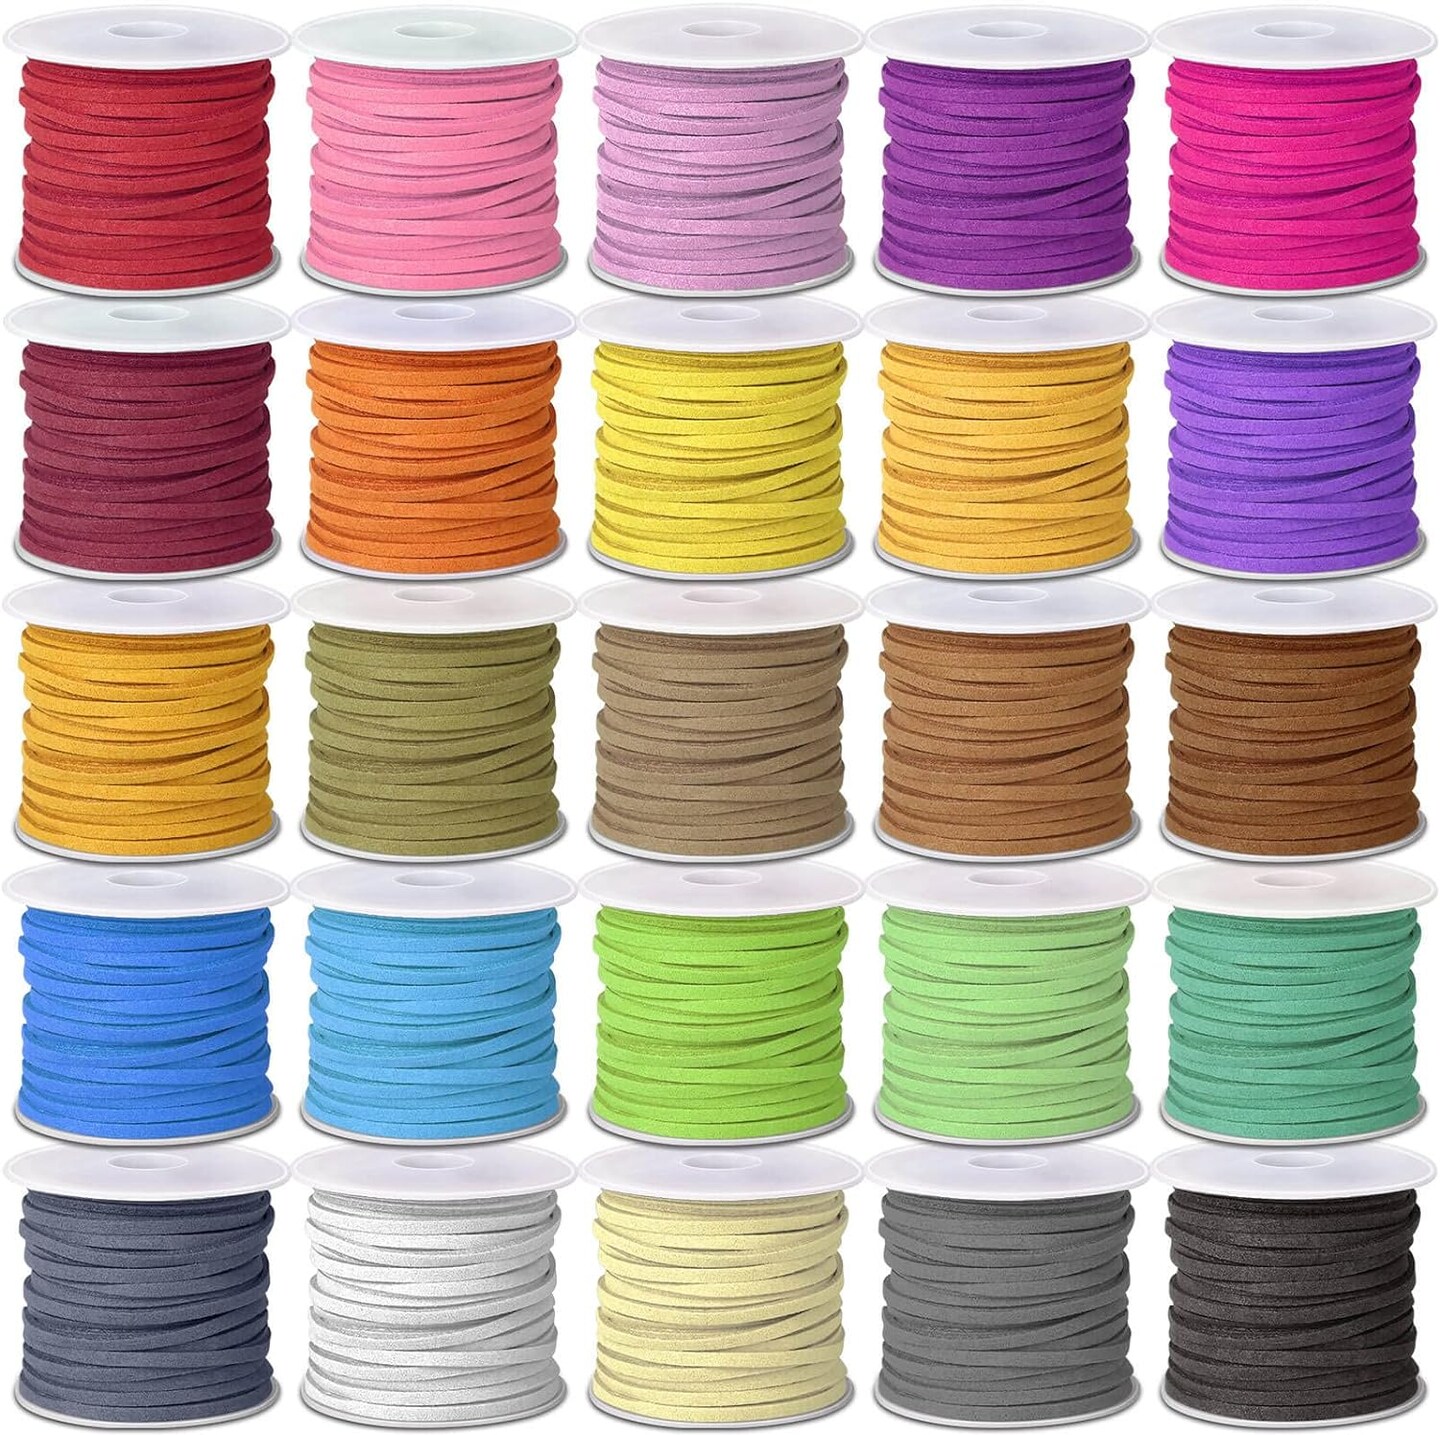 Suede Leather Cord, 25 Rolls Flat for Jewelry Making, Leather Strips &#x26; Laces for Dream Catcher Supplies DIY Crafts, Thread Velvet String for Necklace, Bracelet, Beading